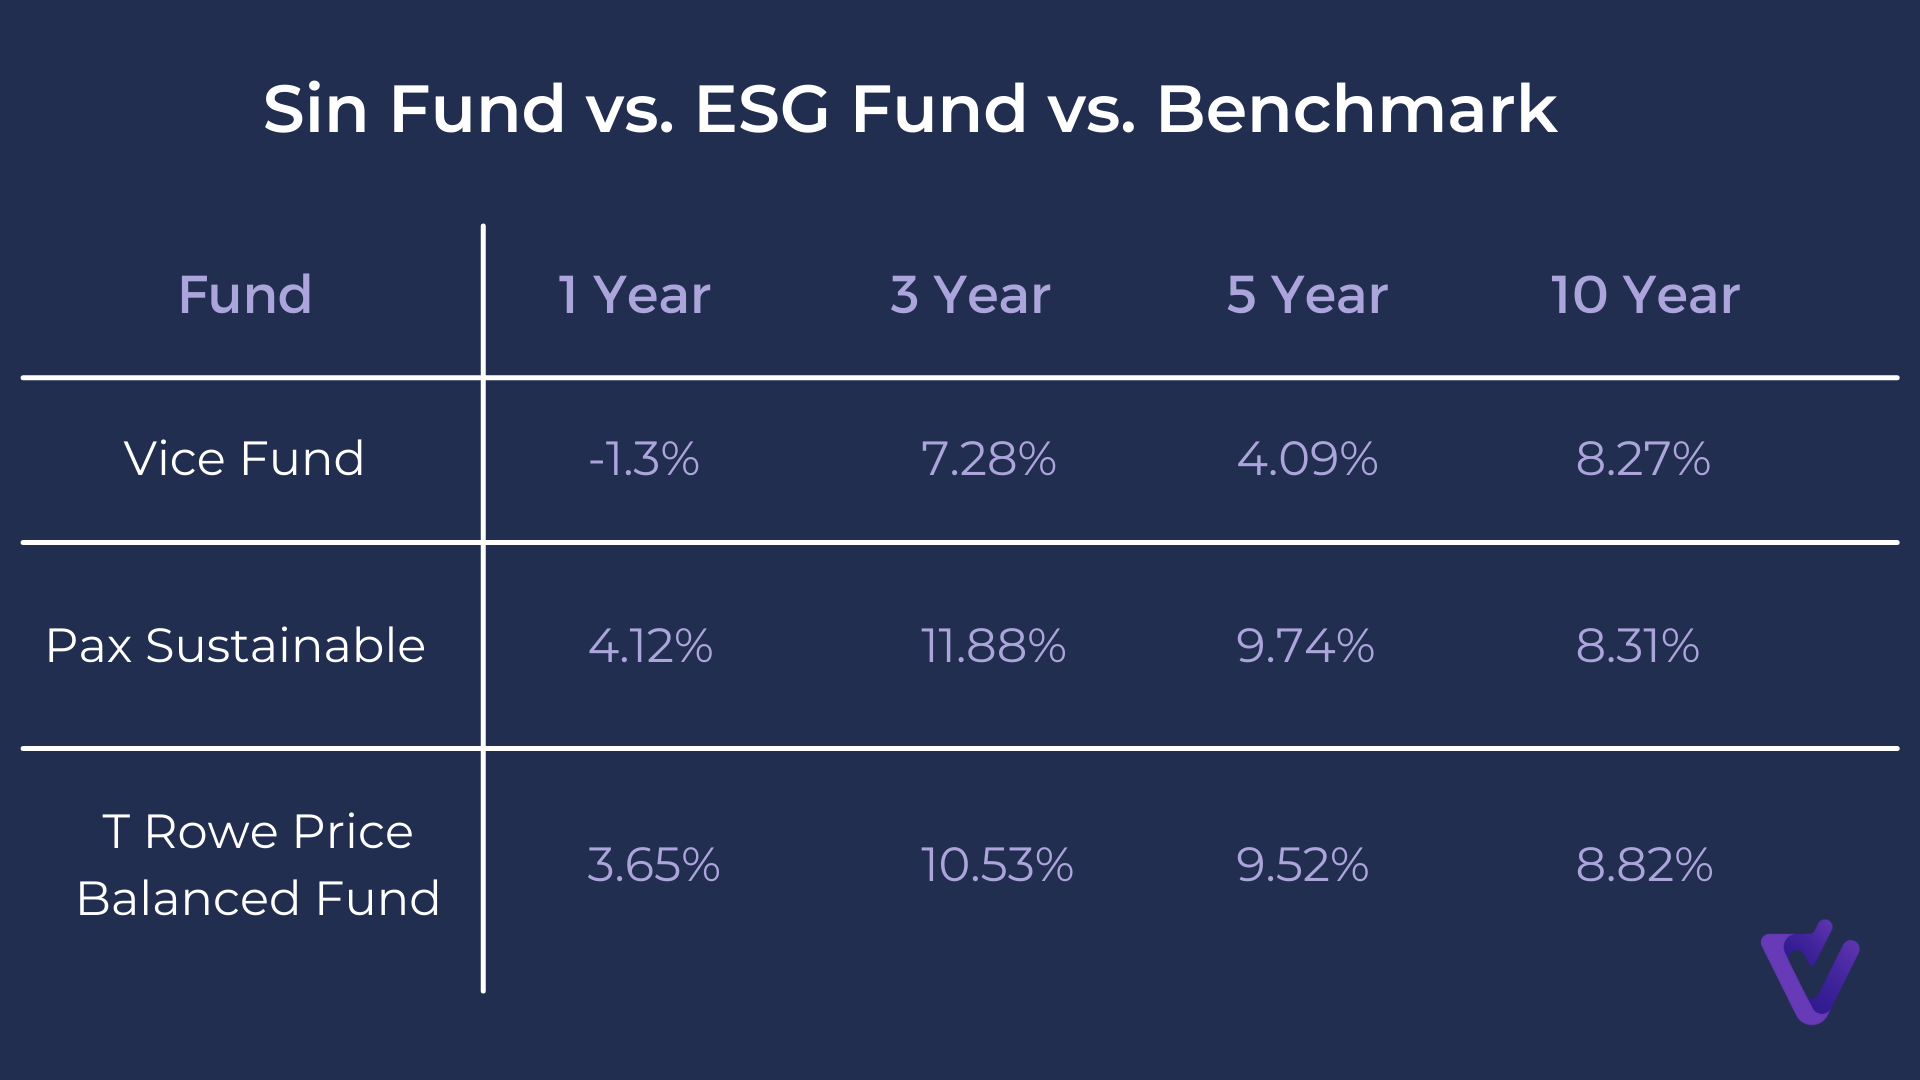 1, 3, 5, and 10 year performance of the main sin fund vs a comparable benchmark and ESG fund